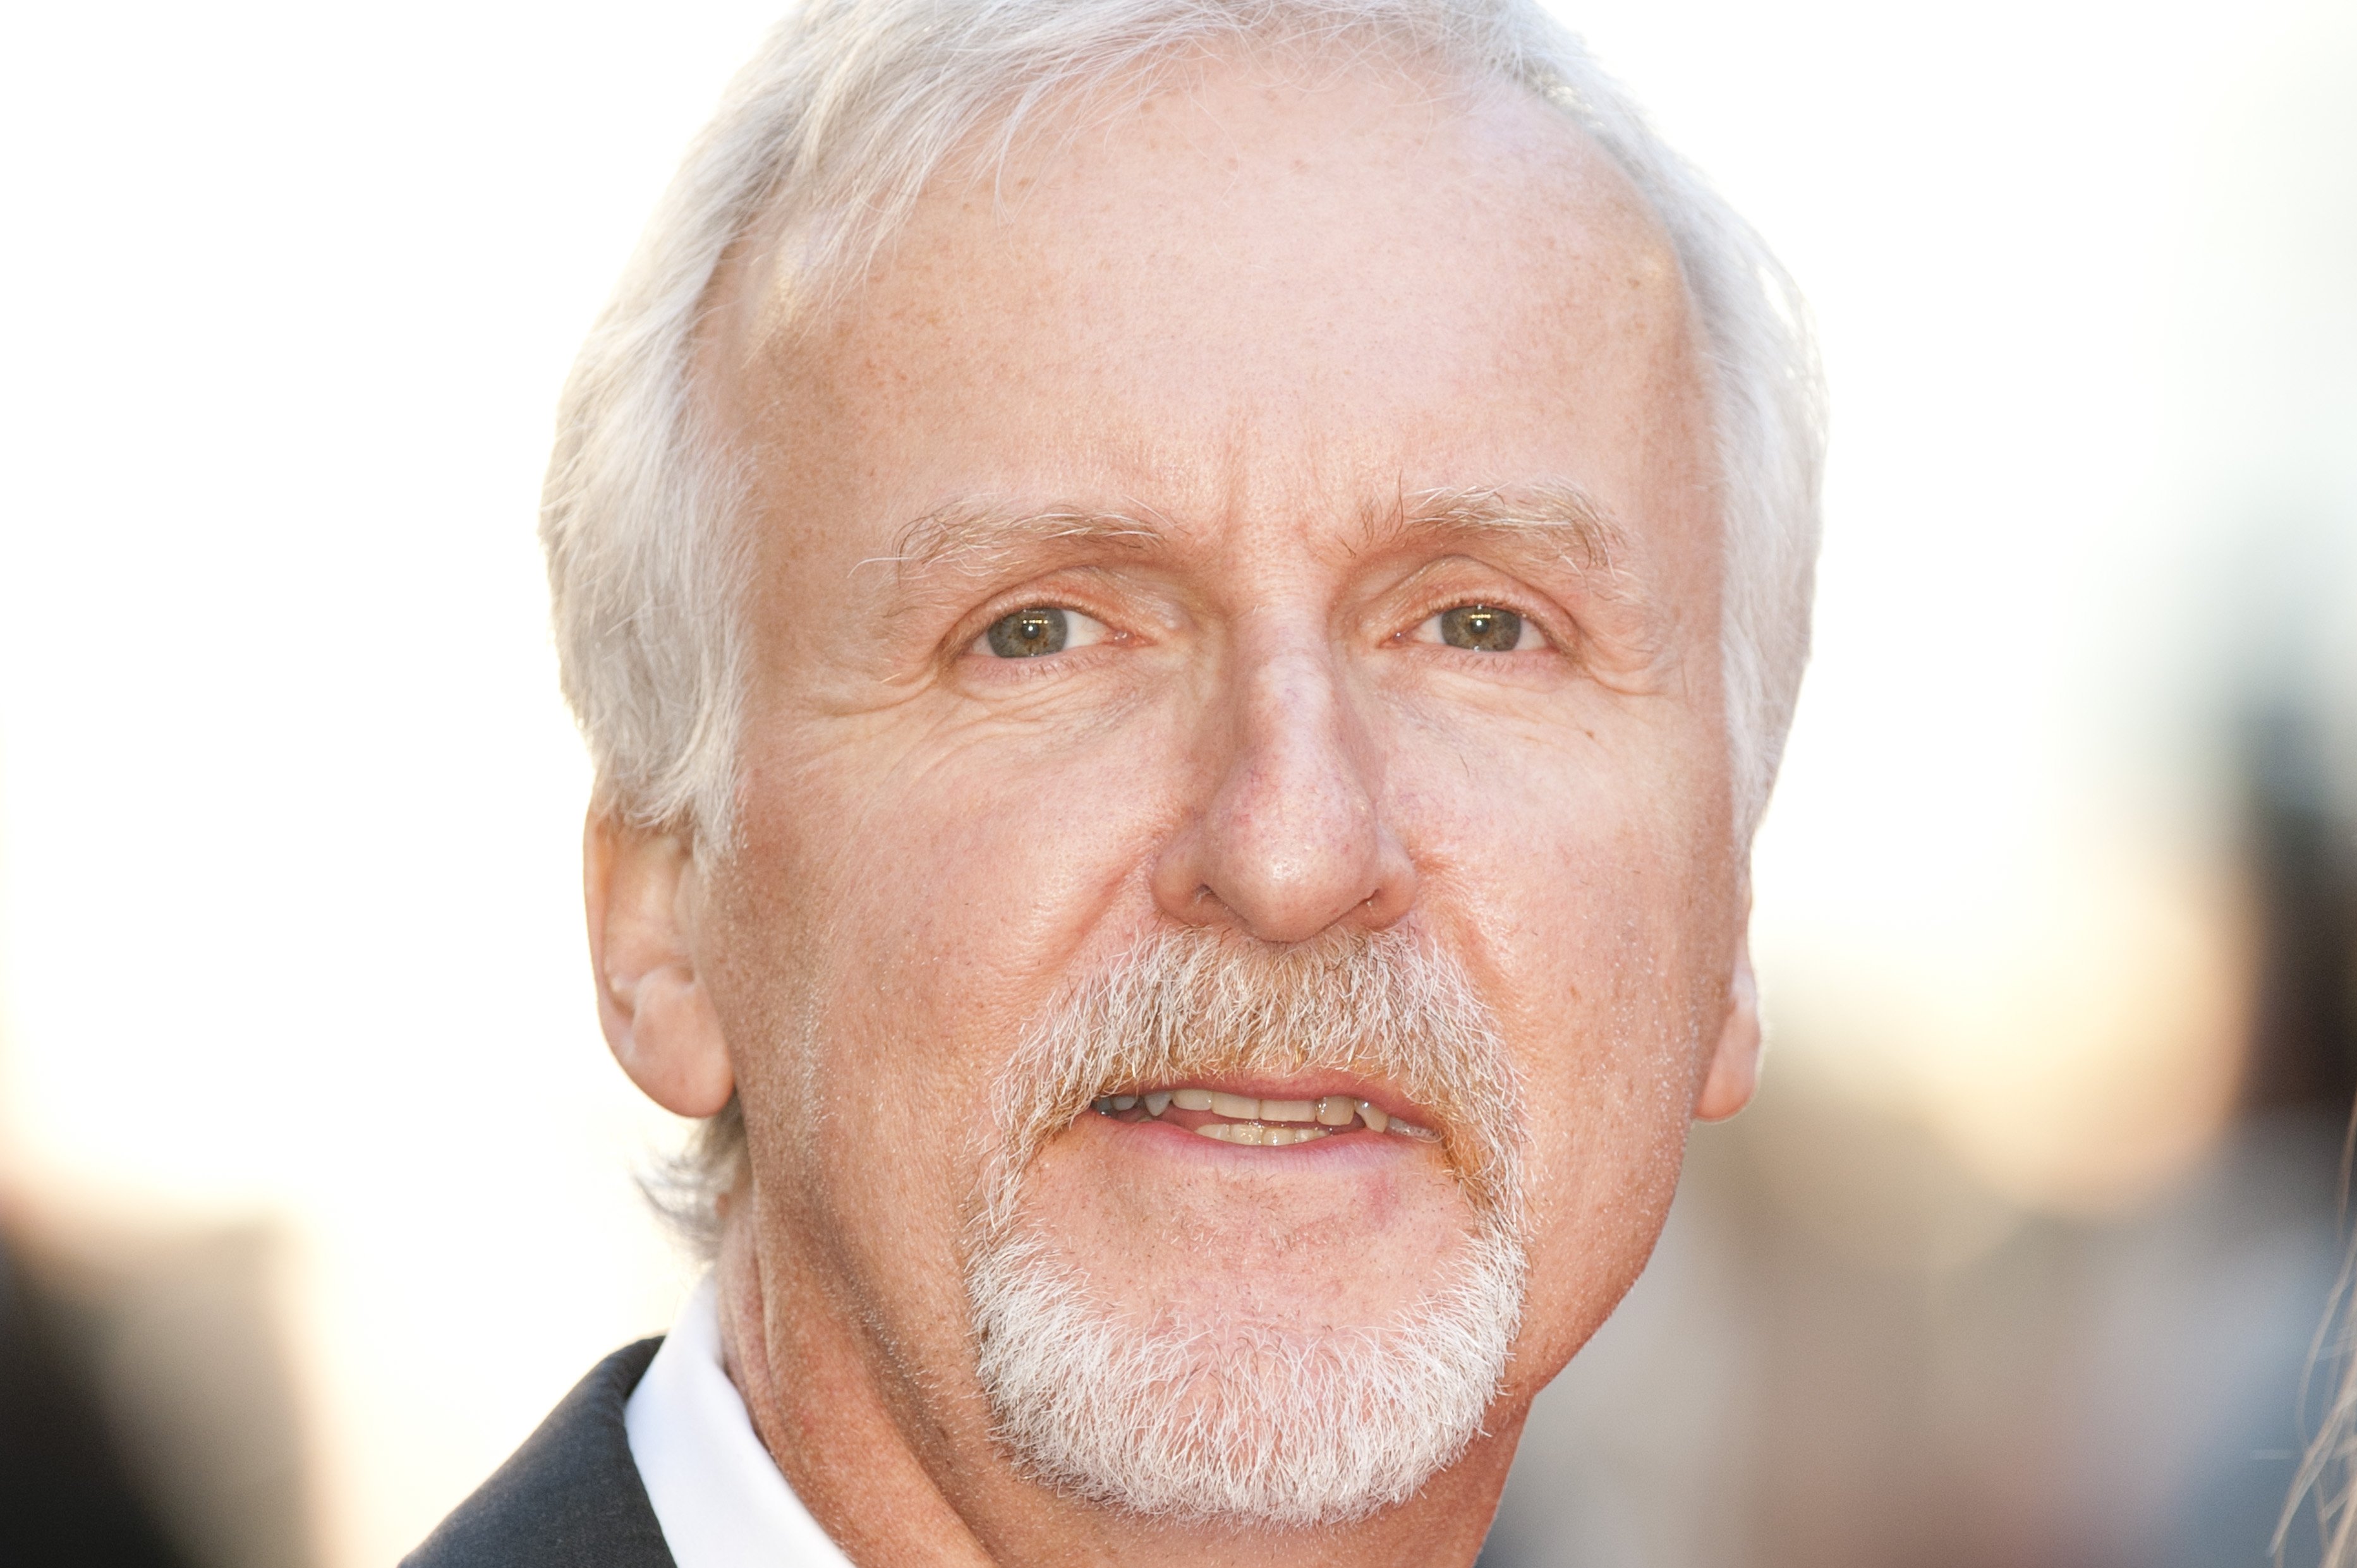 Titanic director James Cameron at the 2012 3D premiere